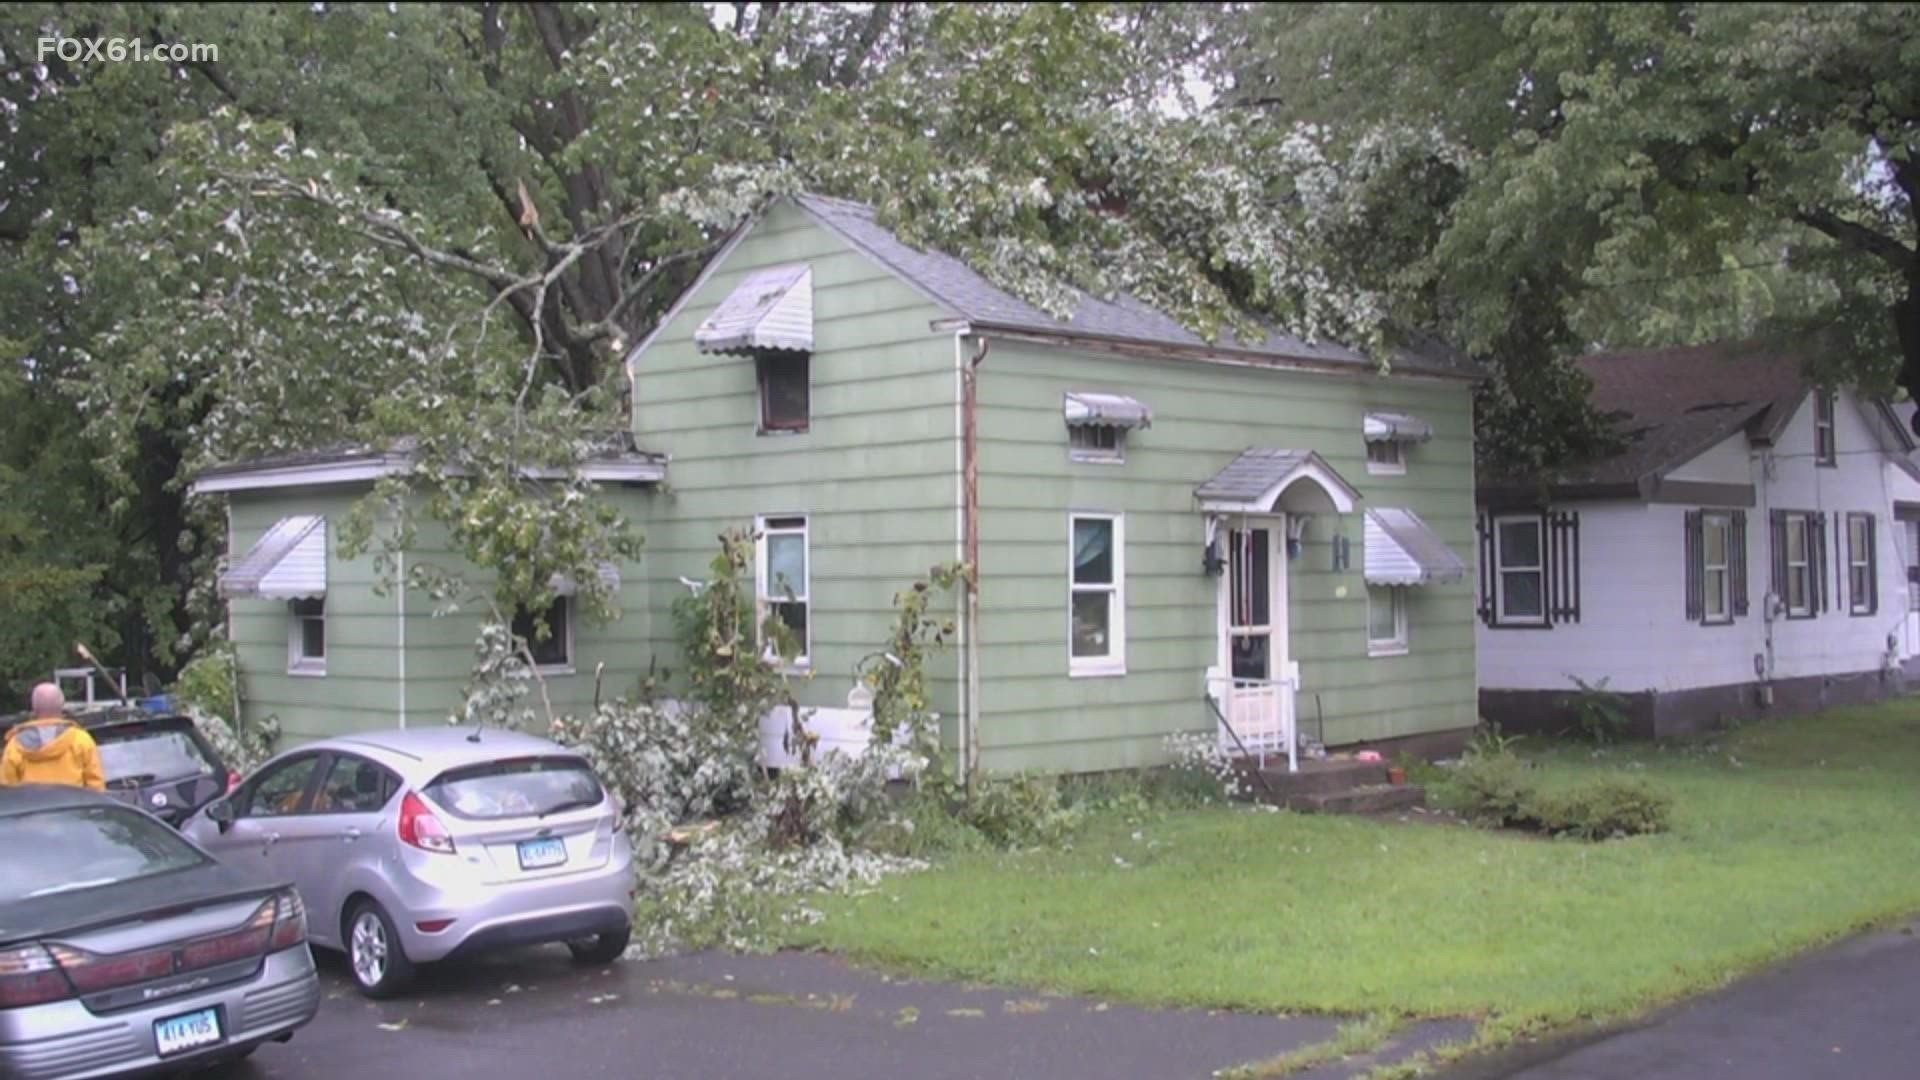 Hartford and Tolland counties were under a tornado warning in the afternoon.